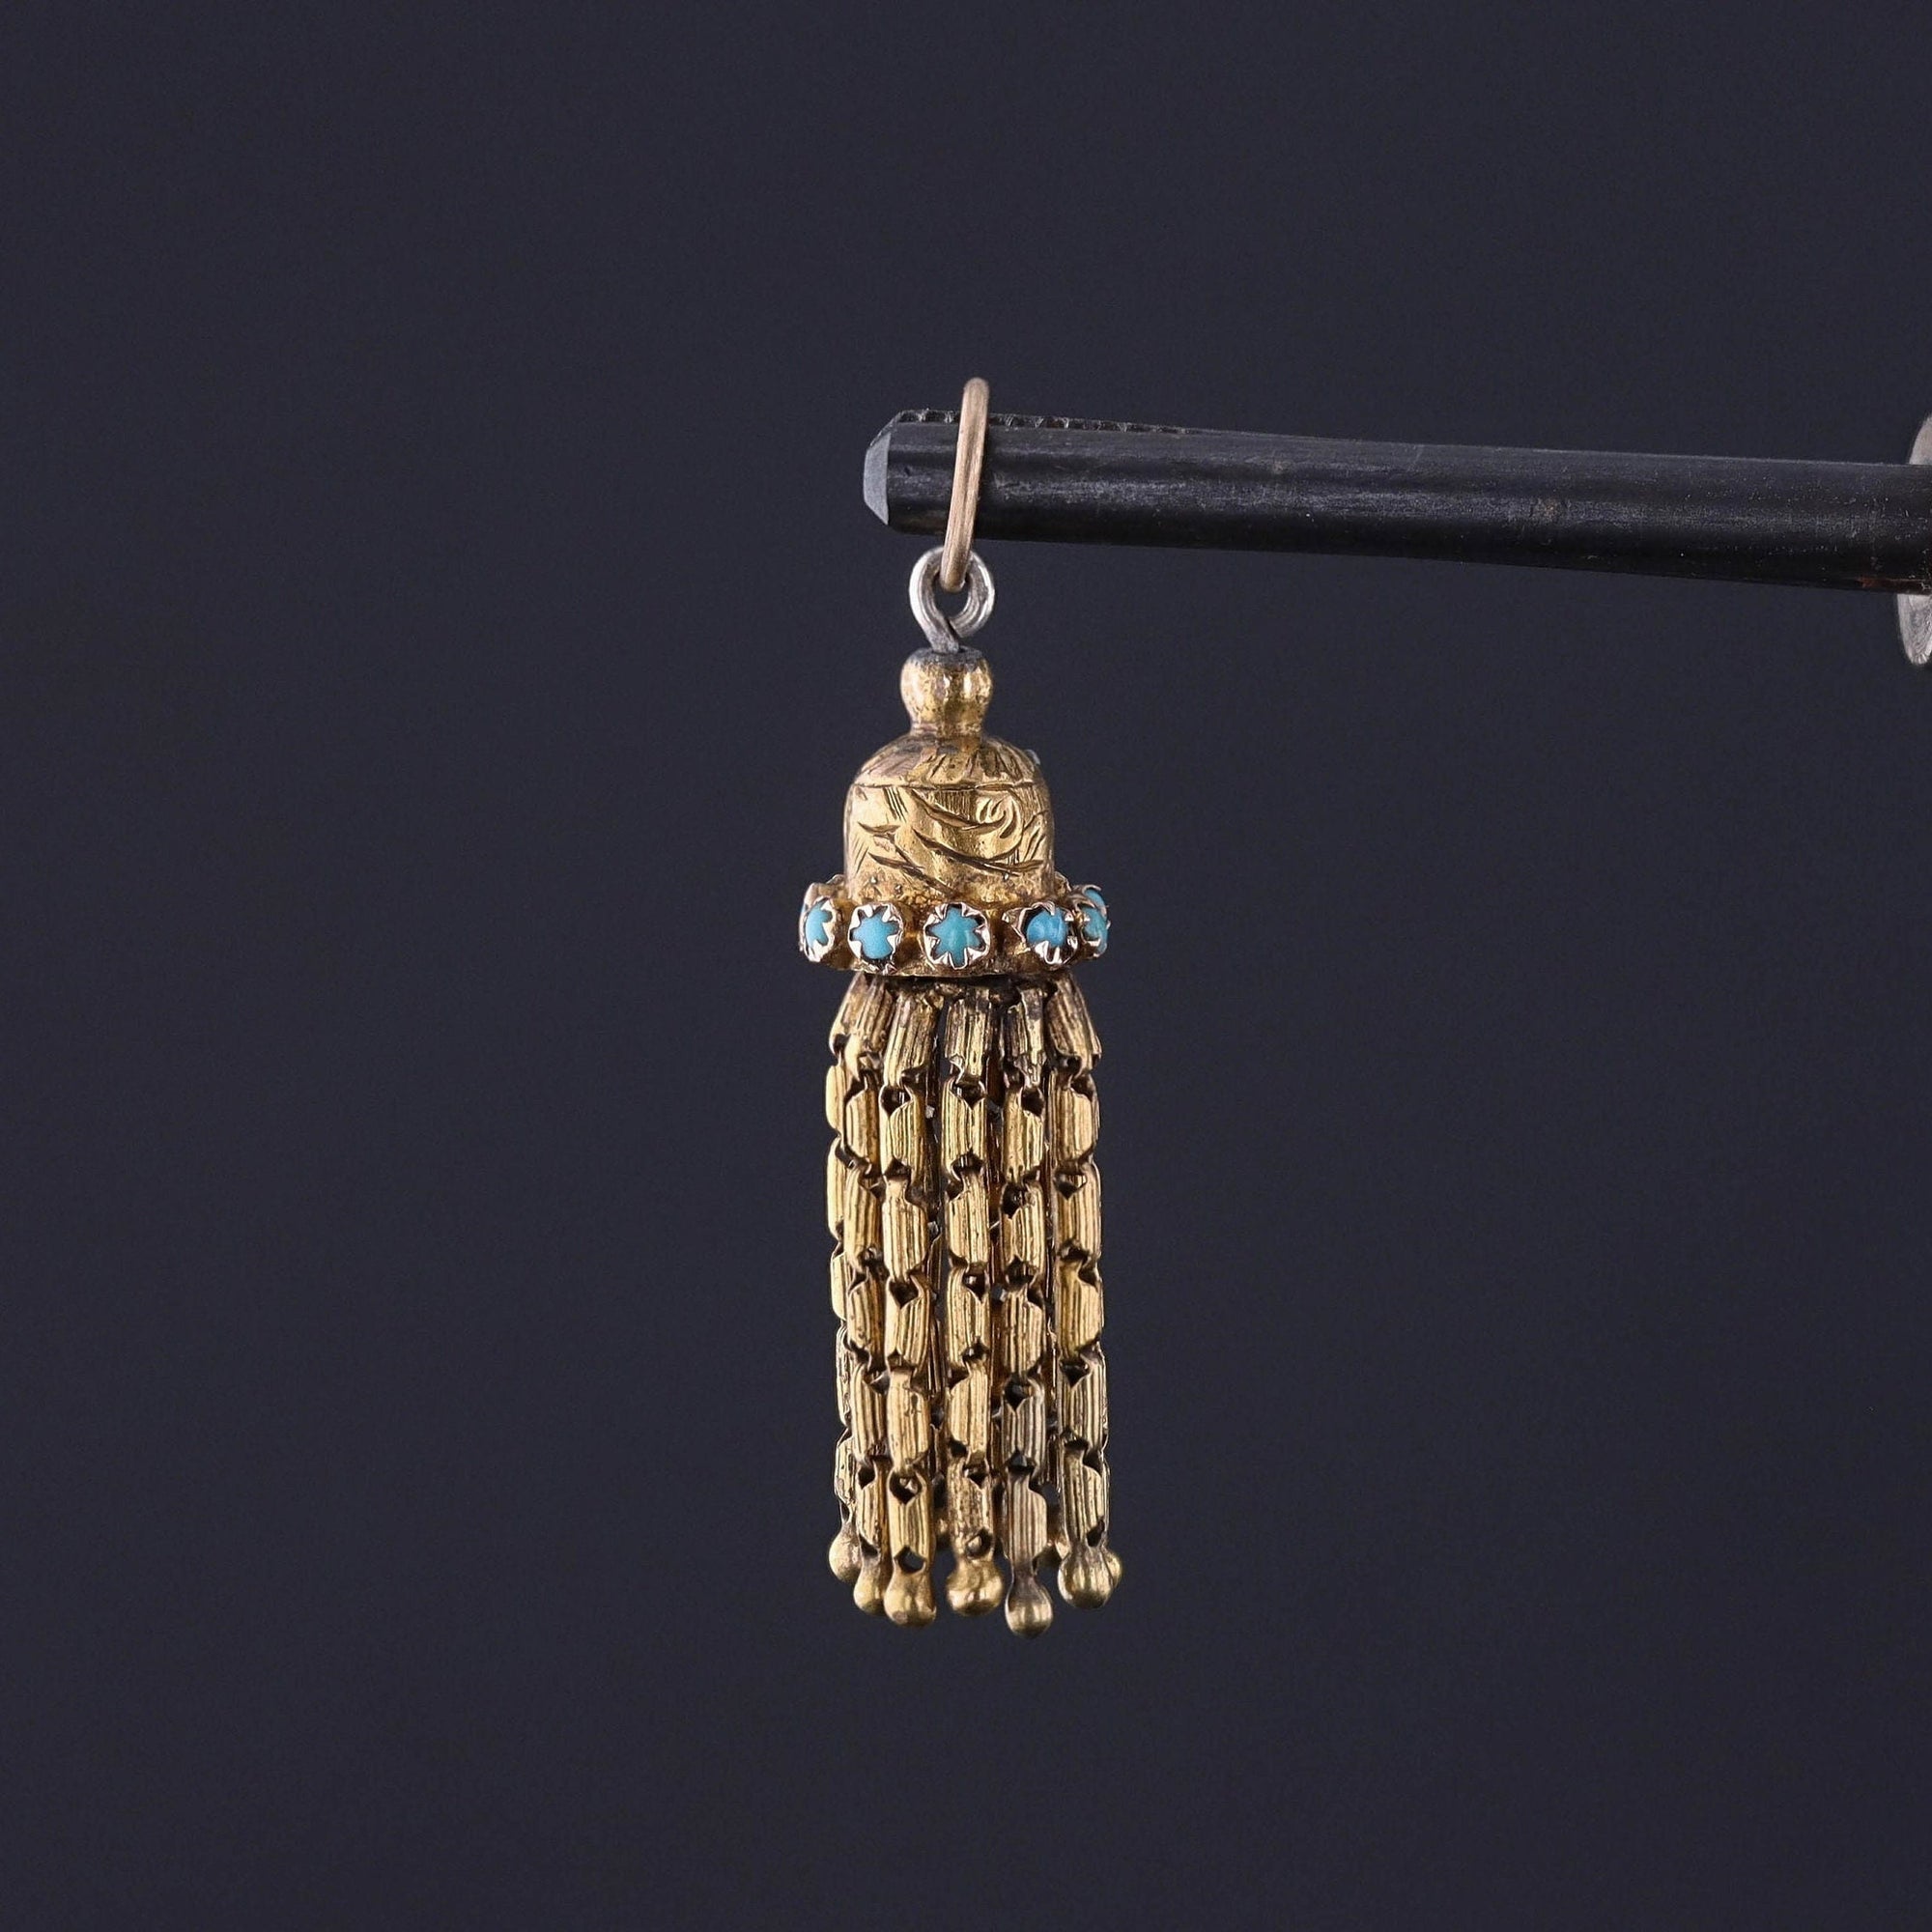 An 18k gold pendant from the Victorian era. The tassel pendant is adorned with turquoise glass cabochons and it is in great condition. Perfect for anytime wear or for a Victorian jewelry collector.